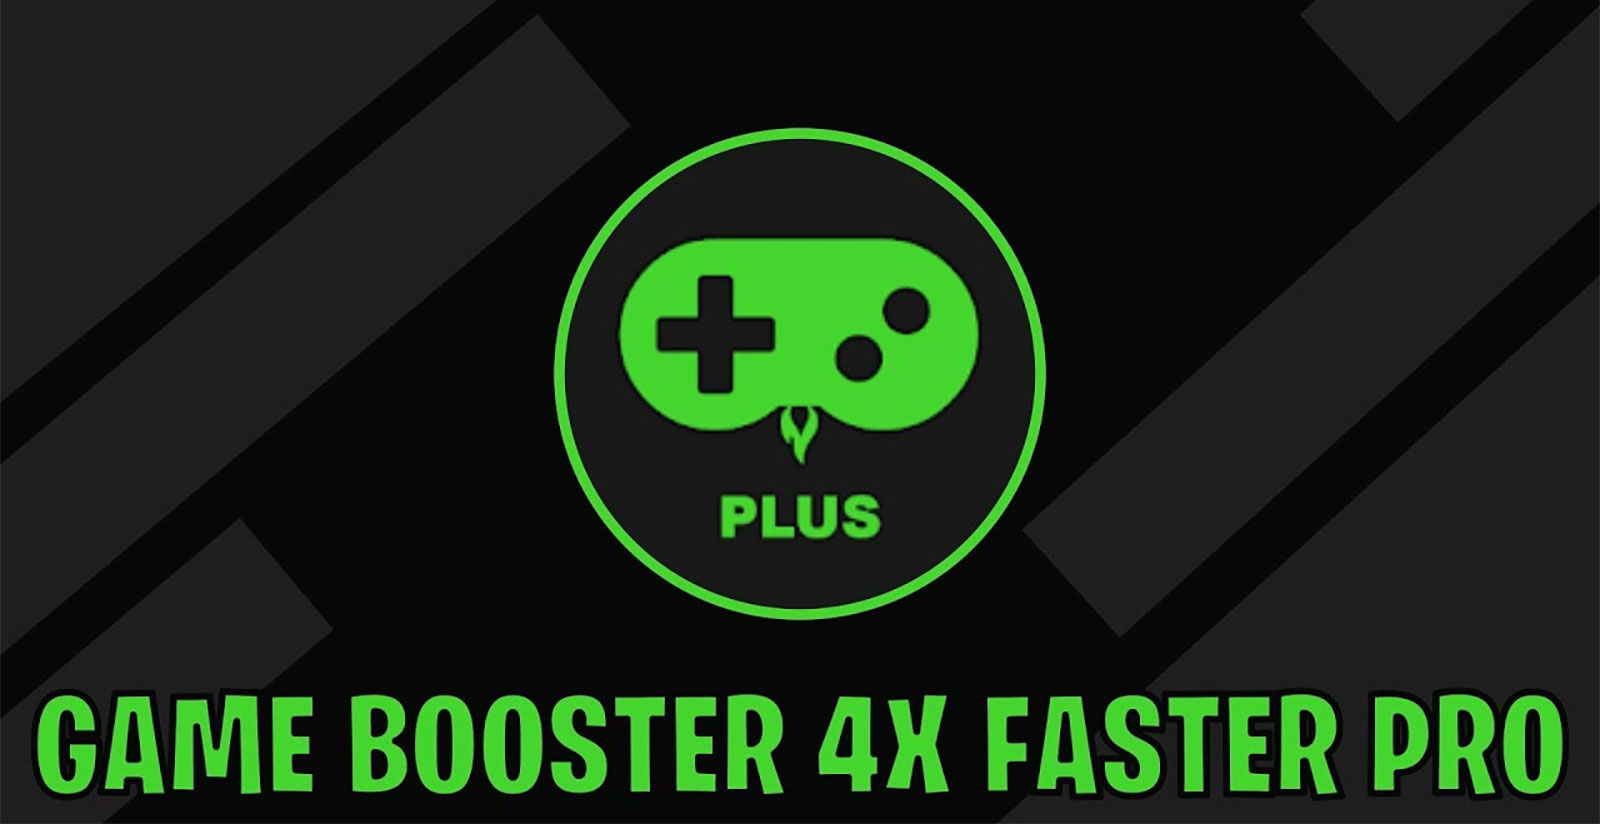 Game Booster 4x Faster Pro Alternatives